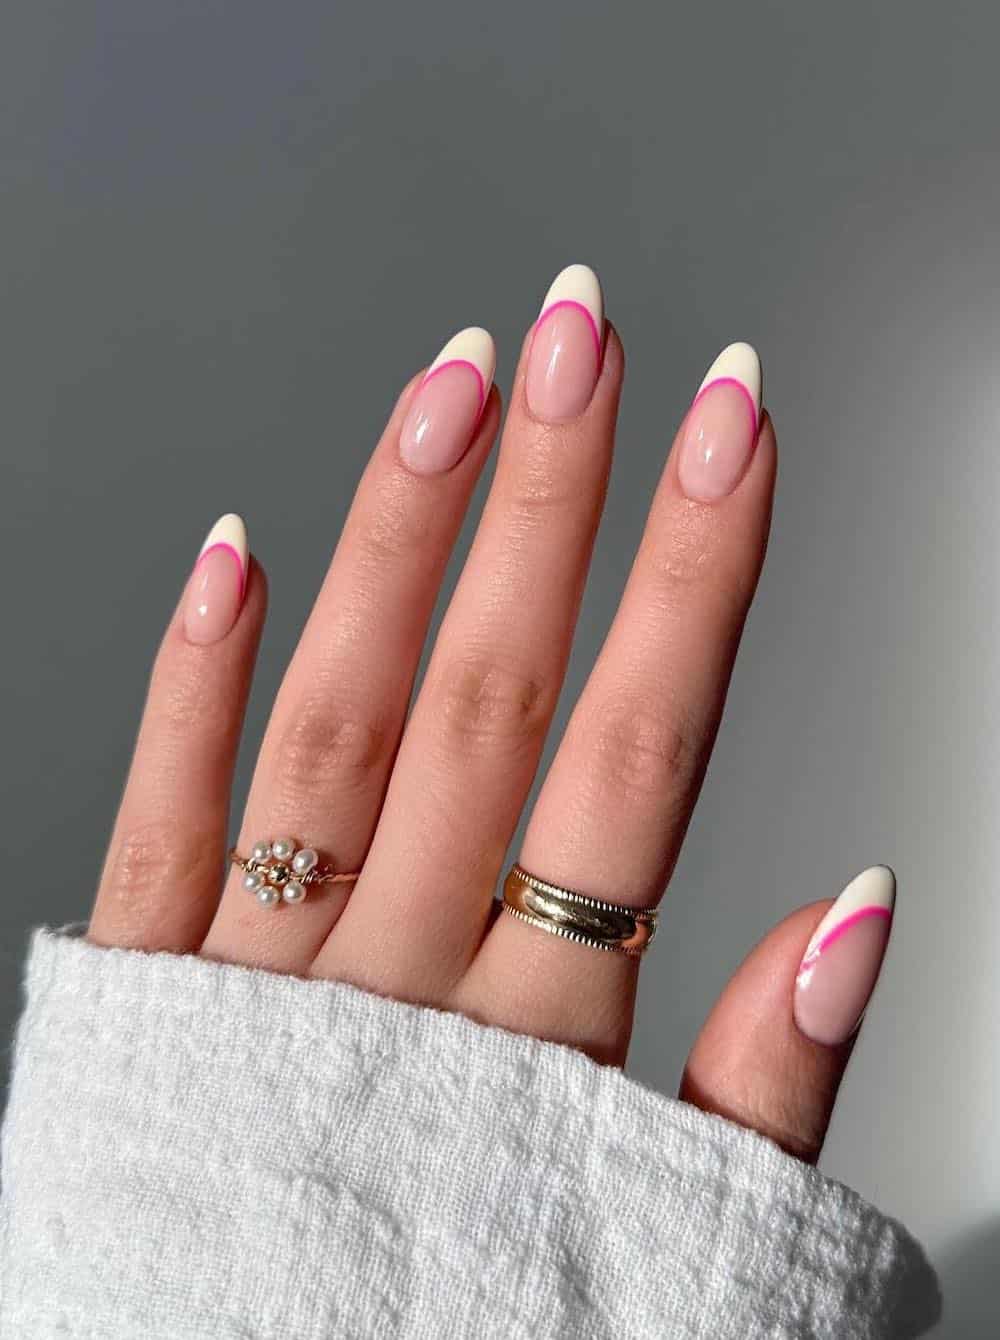 A hand with medium nude almond nails with pale yellow tips and bright pink thin lines underneath